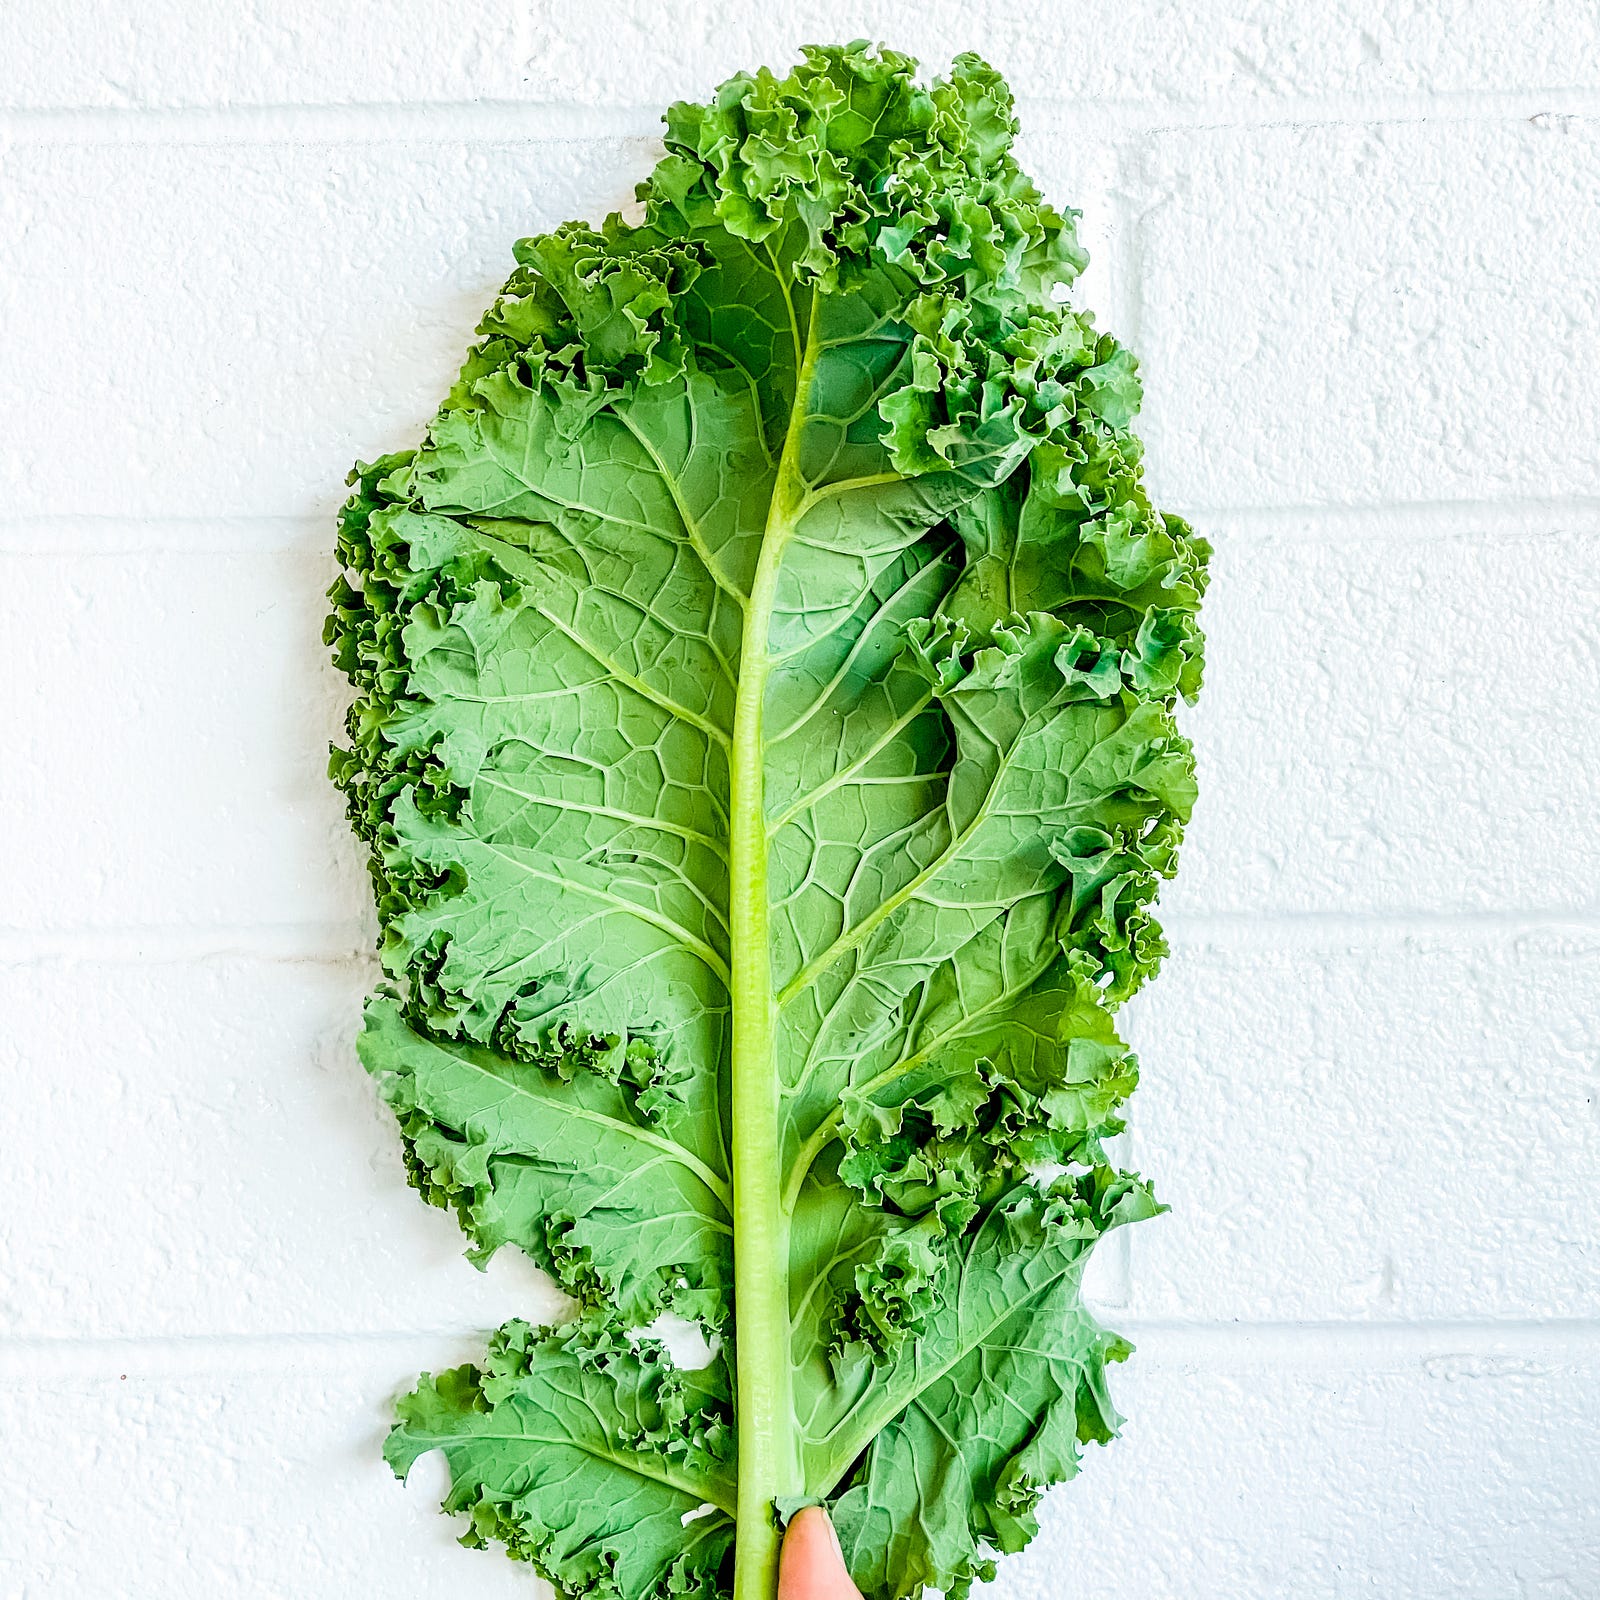 A single green kale leaf. Leafy green vegetables are rich in magnesium.